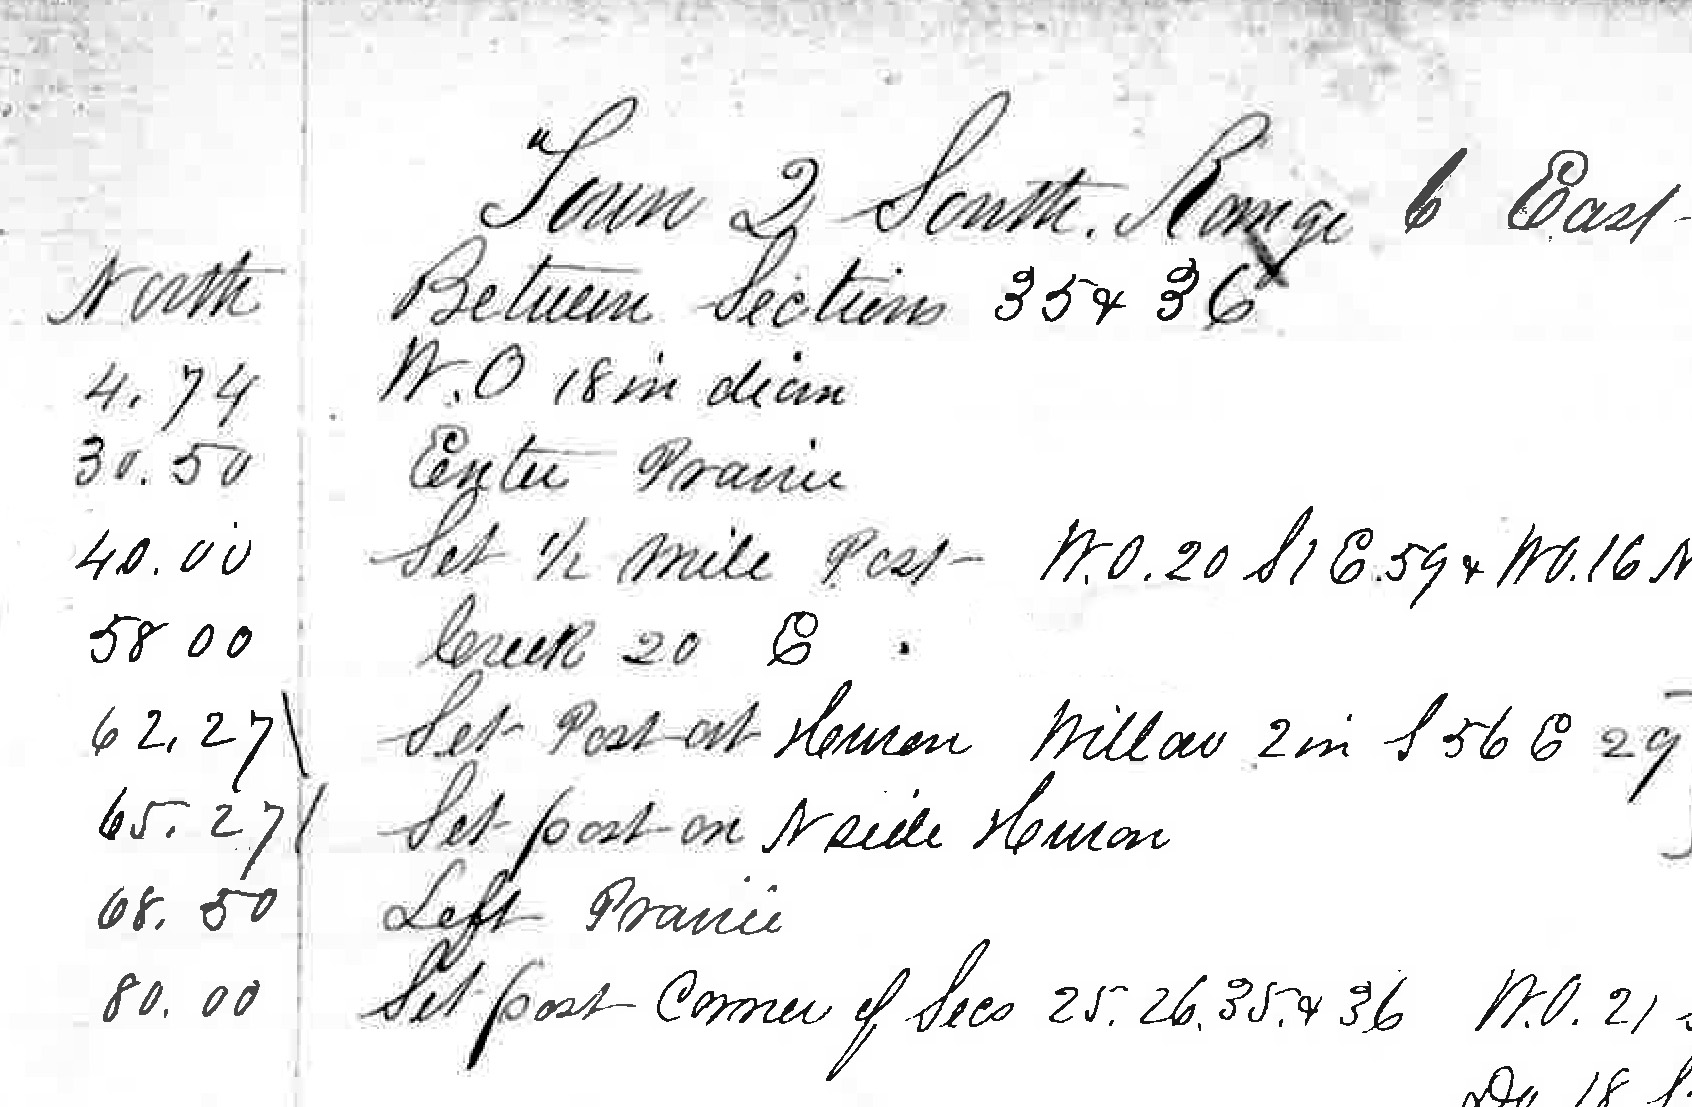 Surveyor's notes from the 1819 survey of Ann Arbor Township, showing the extent of the prairie that would be South Pond.